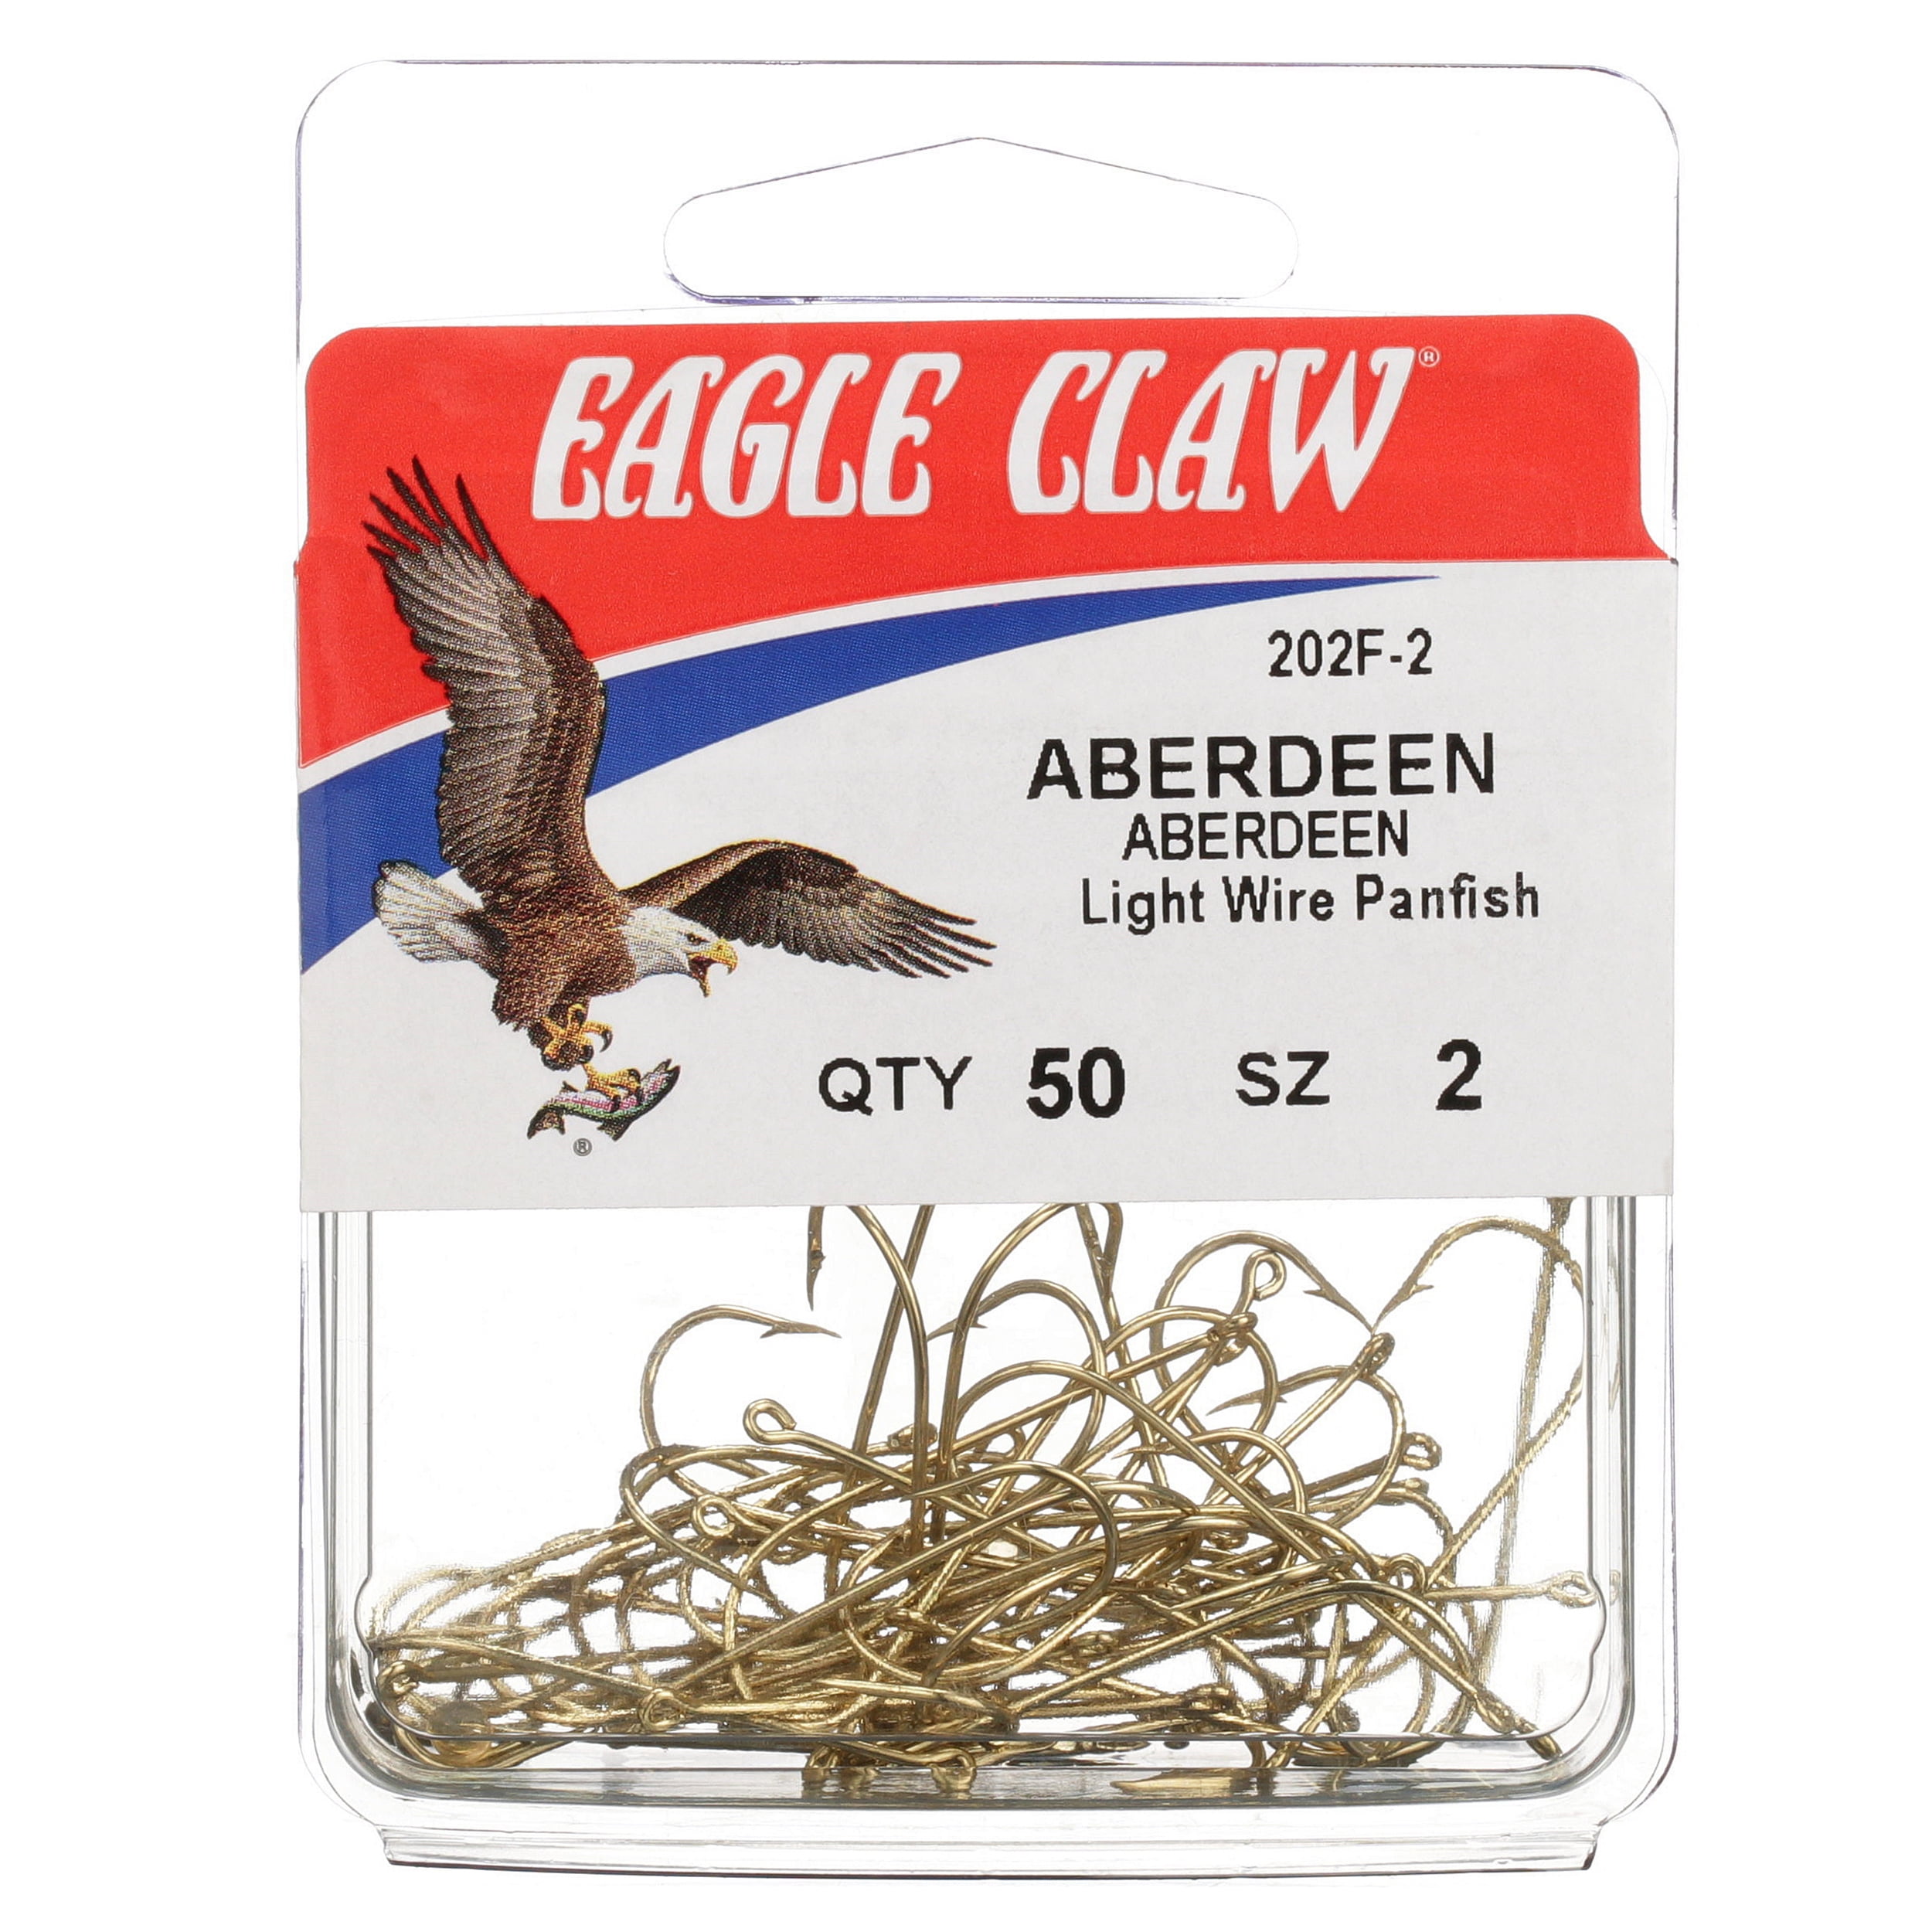 Details about   EAGLE CLAW BRONZE ABERDEEN LIGHT WIRE PANFISH HOOKS 10PK SIZE 2 